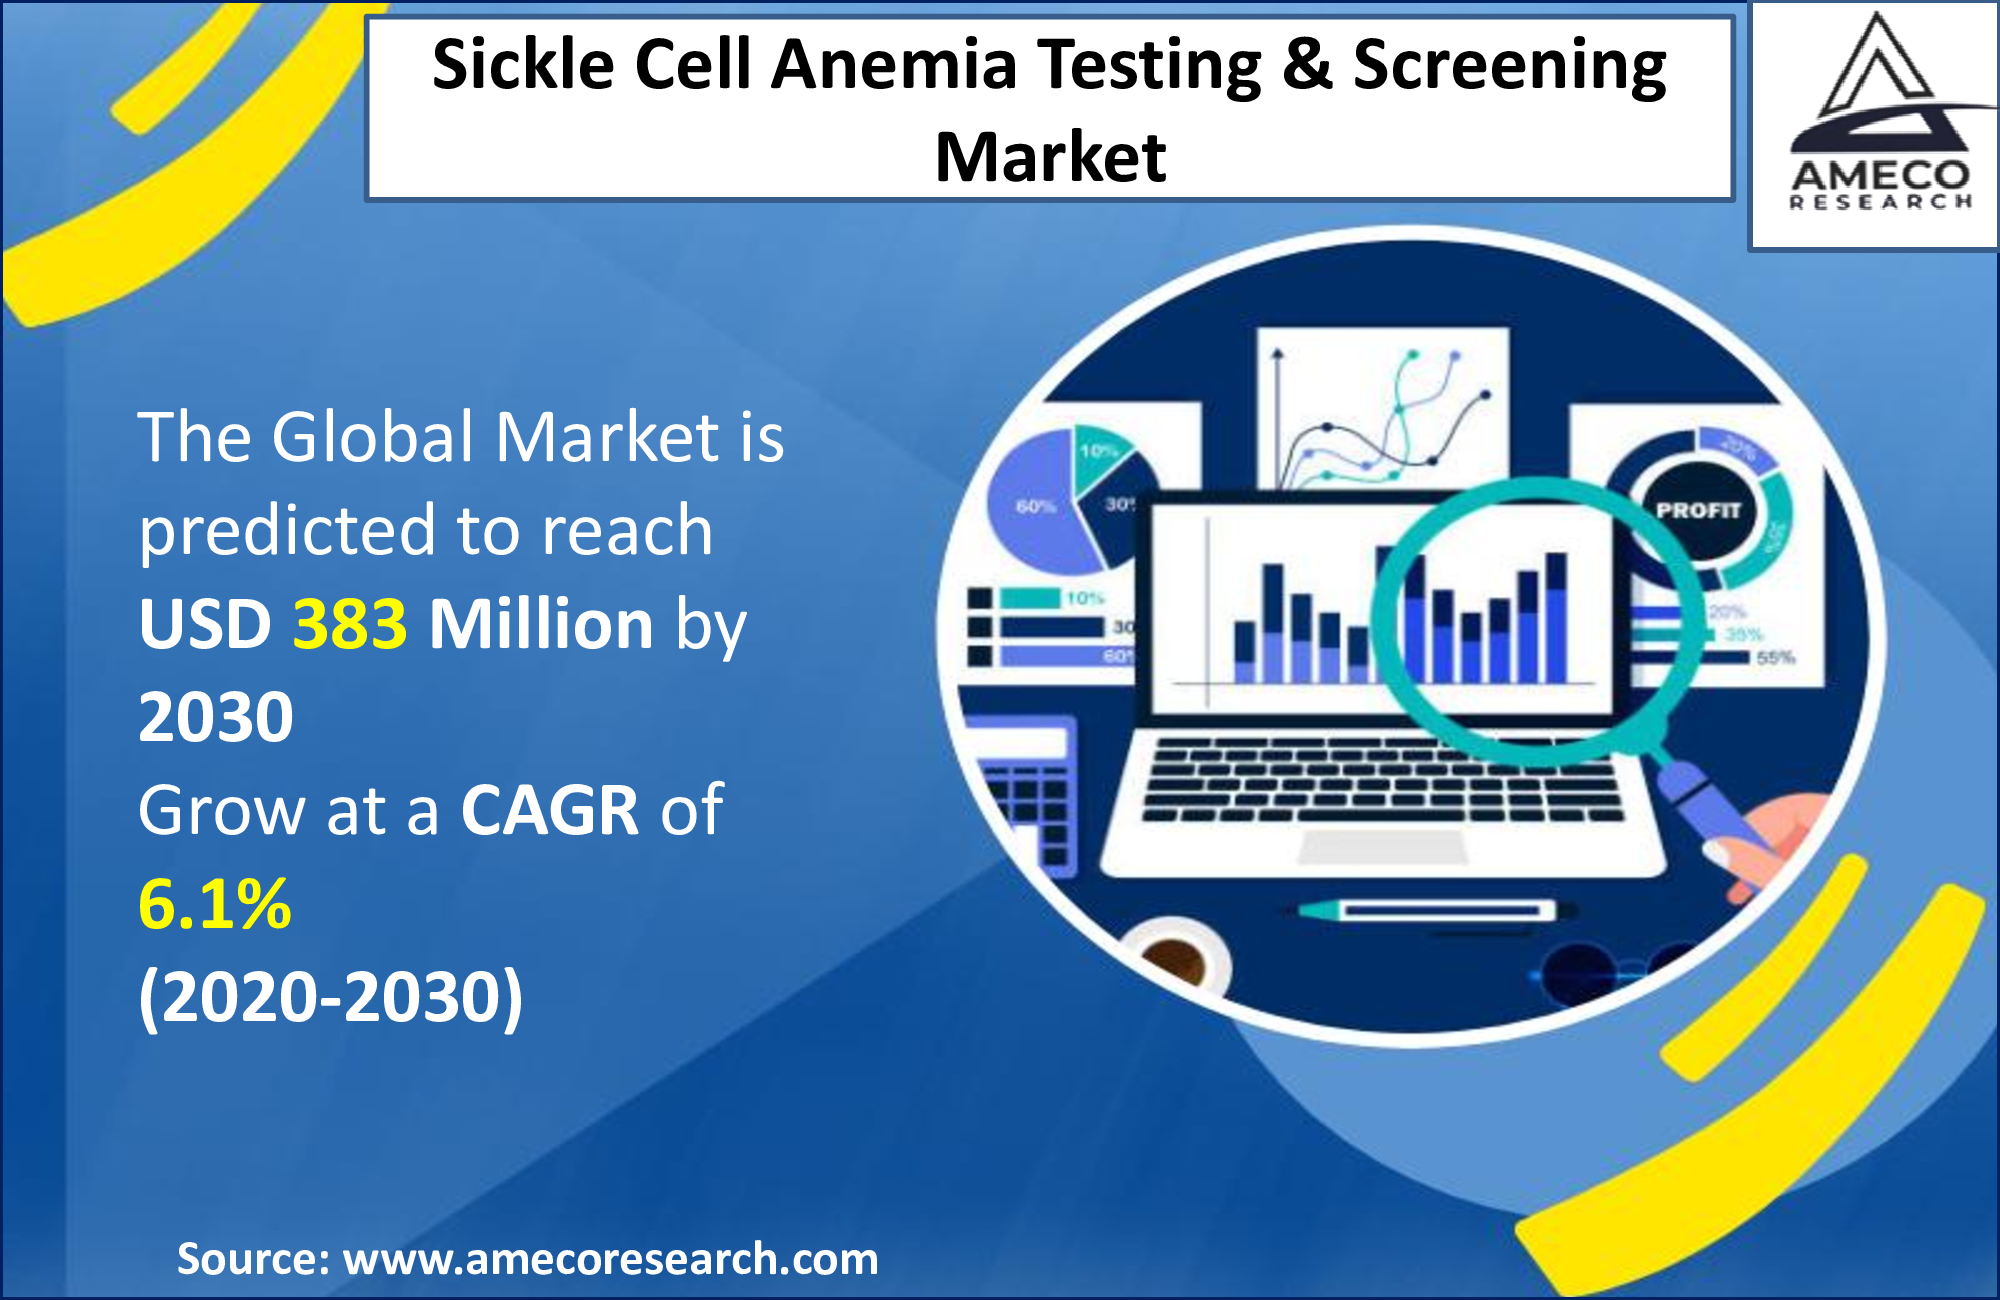 Sickle Cell Anemia Testing & Screening Market